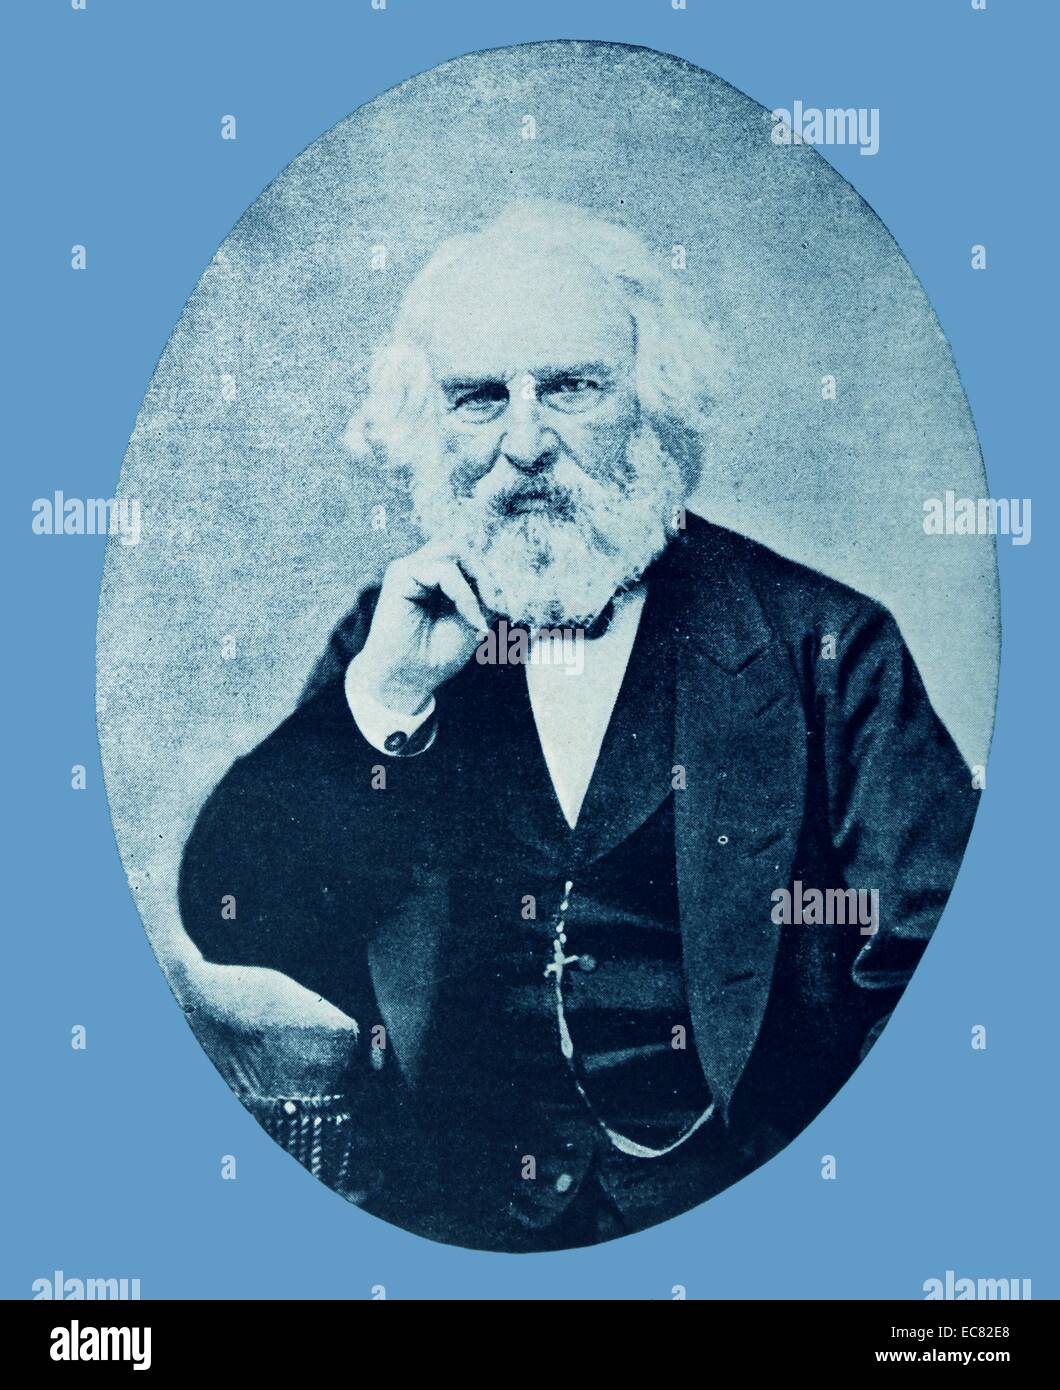 Engraving of Henry W. Longfellow (1807-1882) American poet and educator whose works include 'Paul Revere's Ride', The Song of Hiawatha, and Evangeline. Dated 1850 Stock Photo